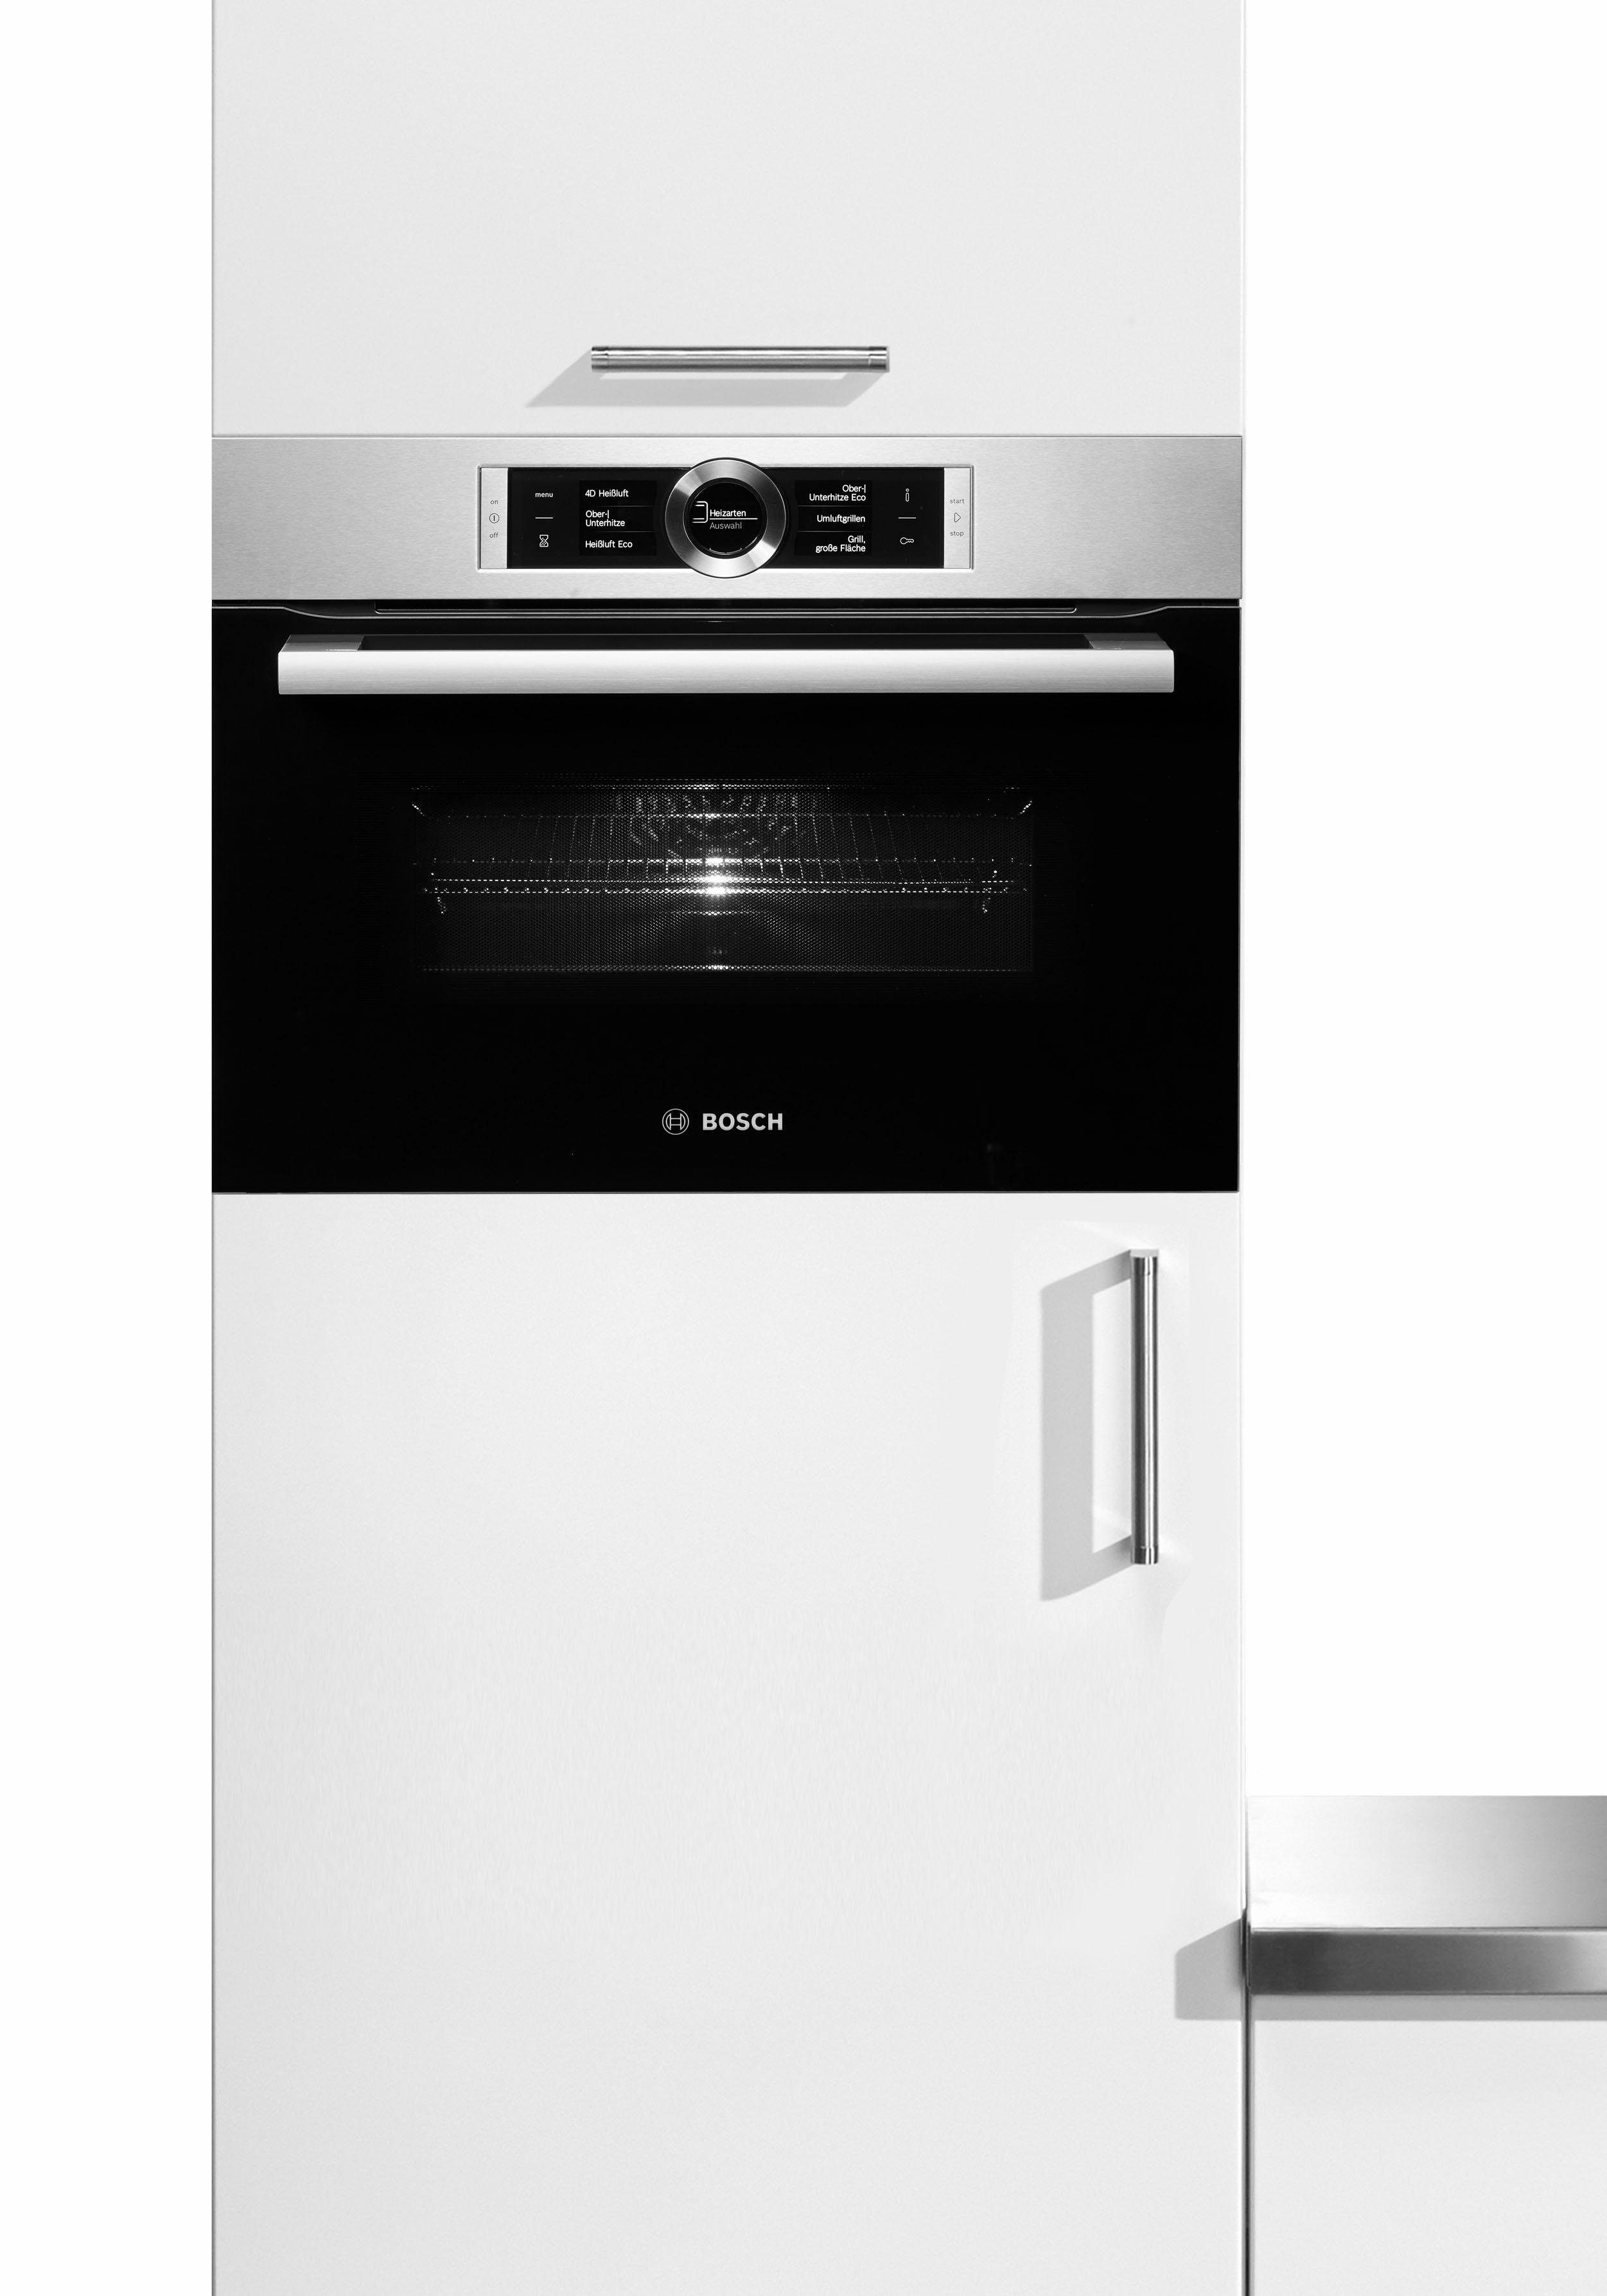 BOSCH Backofen mit Mikrowelle ecoClean CMG636BS1, Mikrowellenfunktion Direct